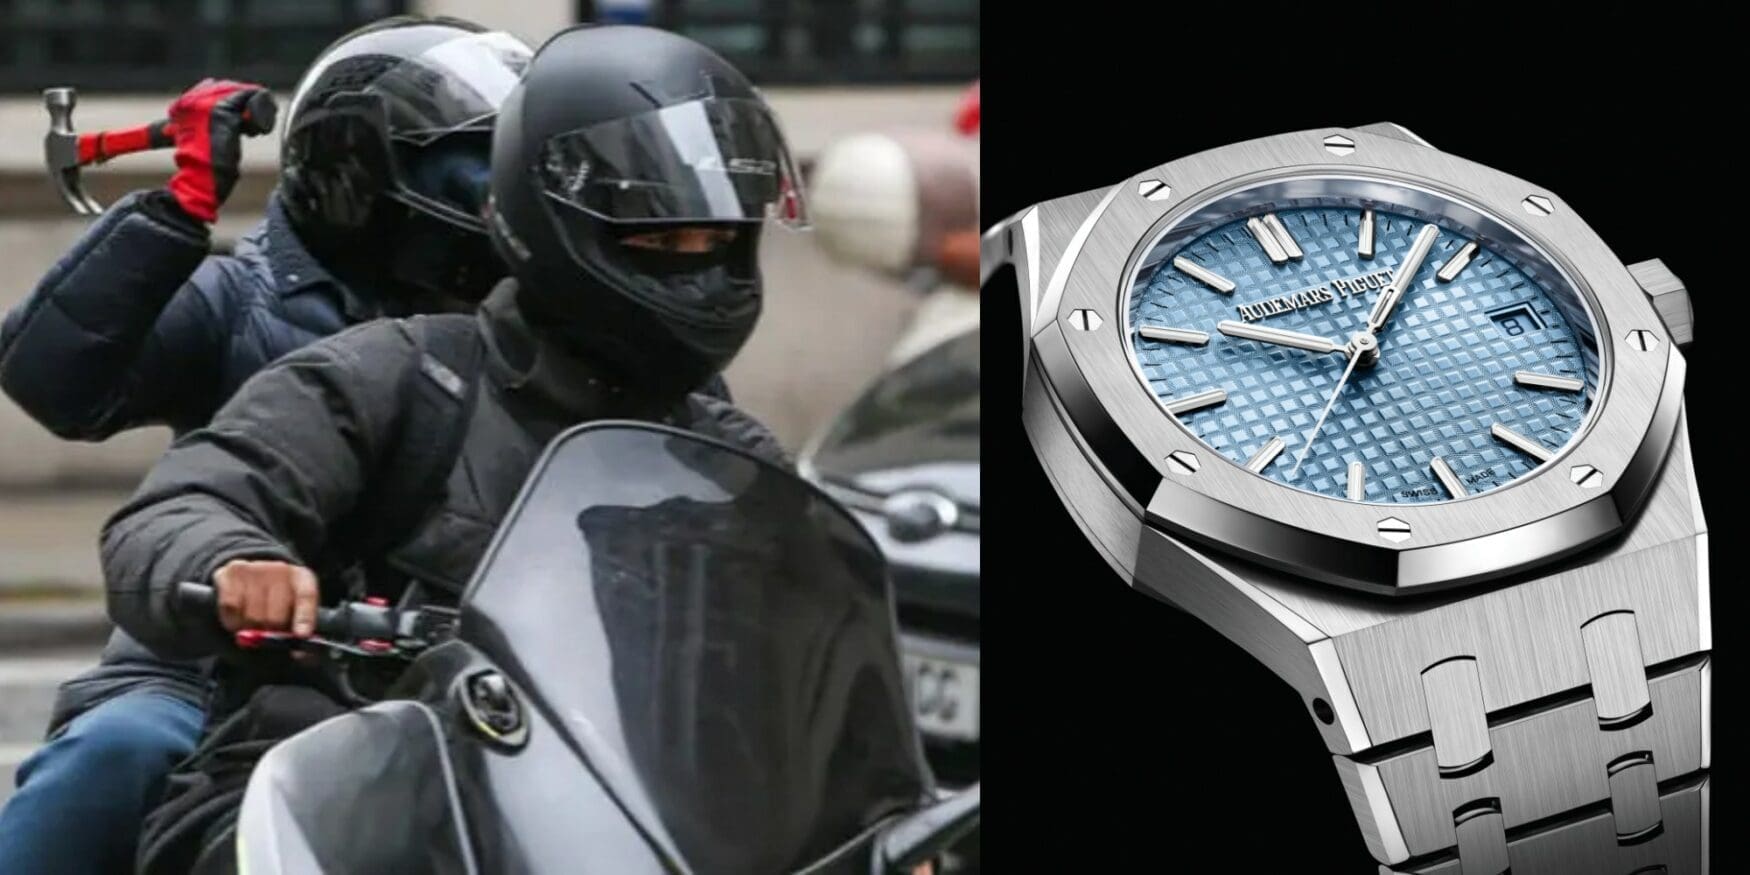 The fight against crime: Audemars Piguet offers new guarantee for stolen watches